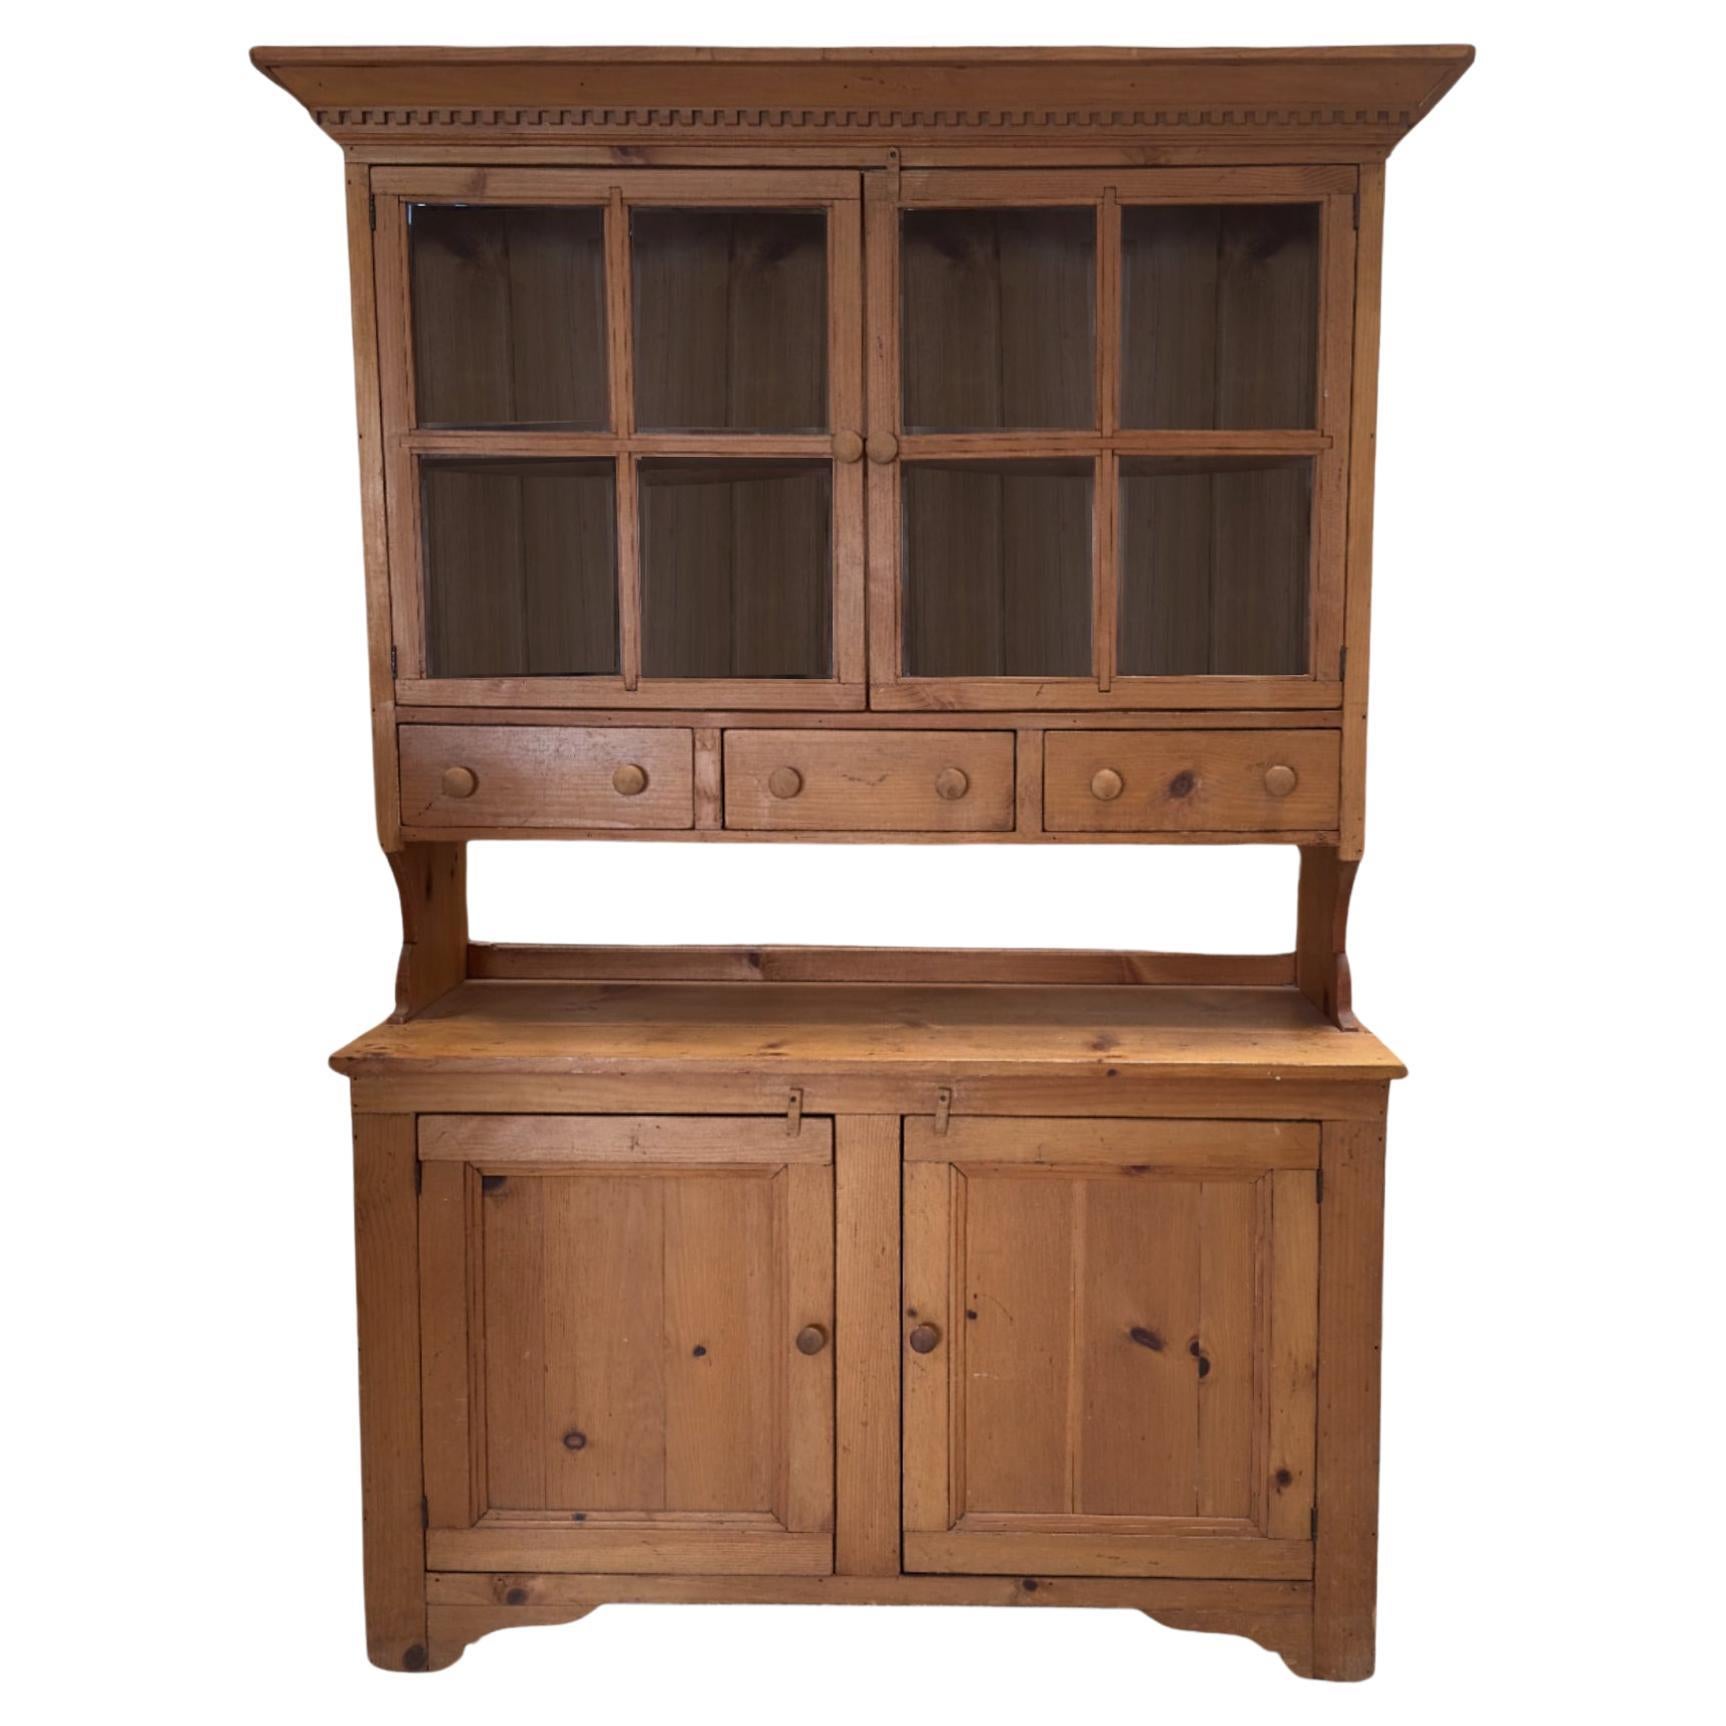 Vintage Knotted Pine Kitchen Cupboard For Sale